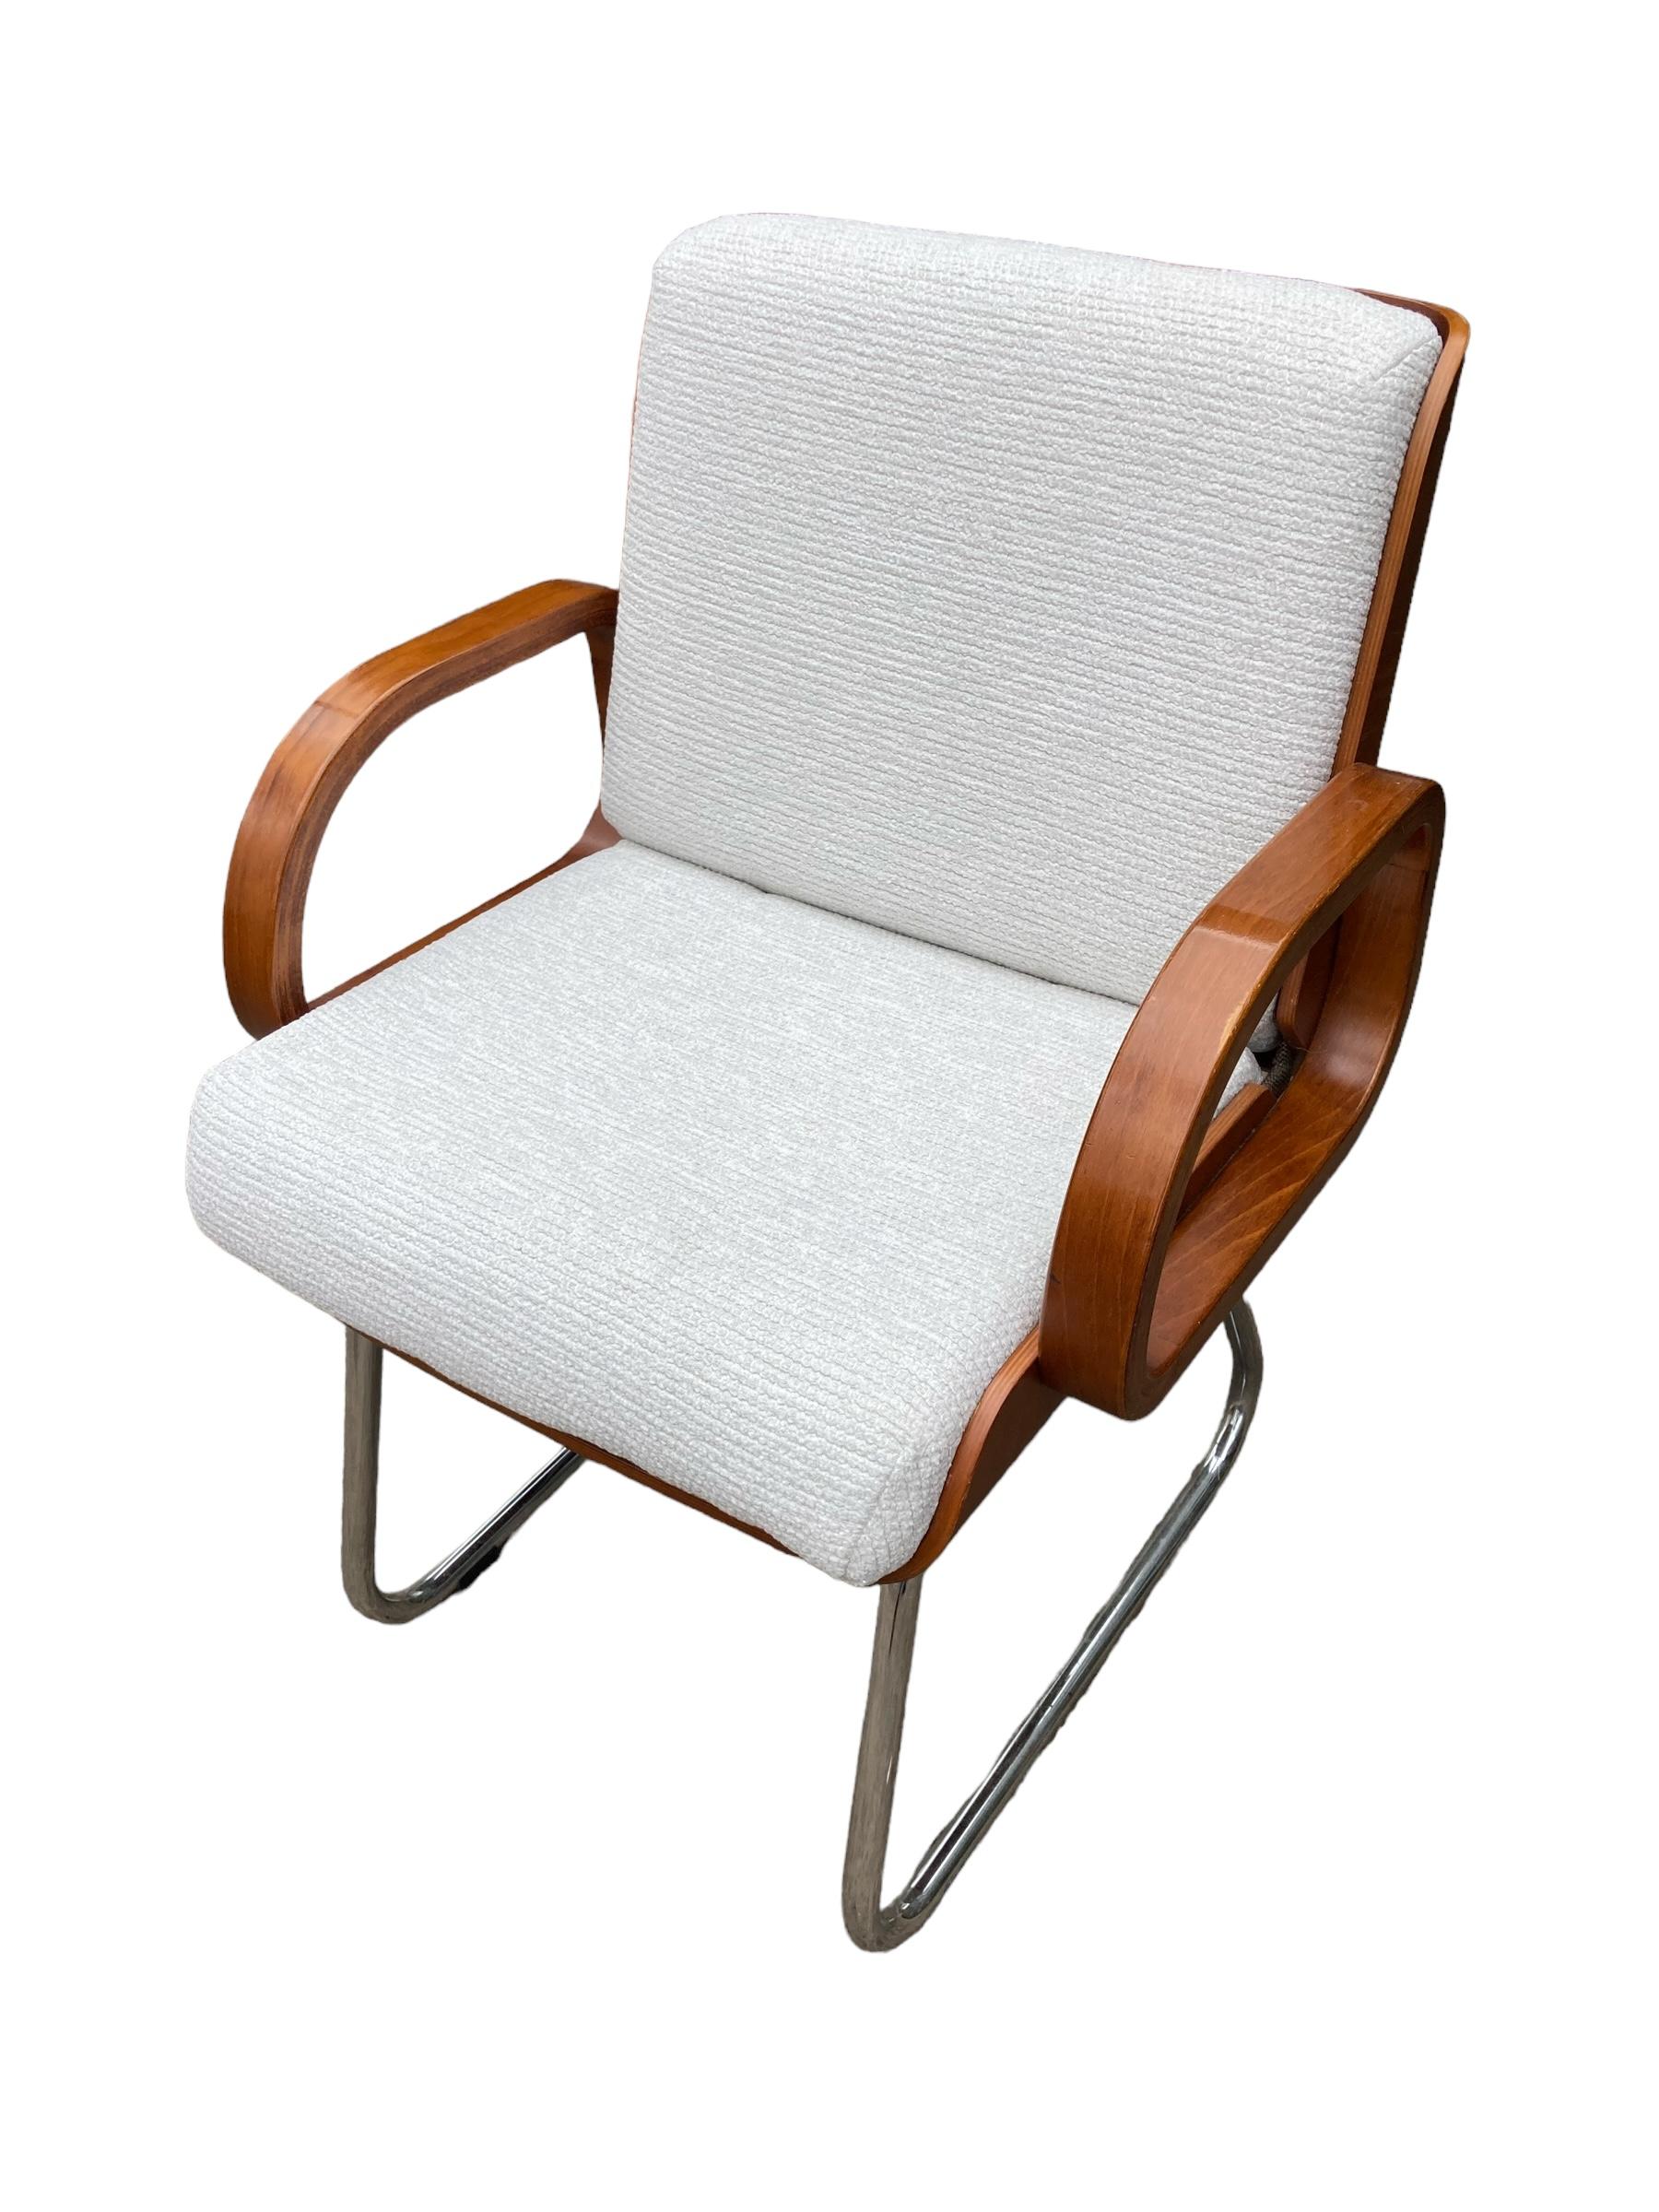 Gordon Russell Mid Century Bauhaus Style Teak and Chrome Office chair, reupholstered in a Boucle style off white fabric. Classic Minimalistc Mid Century Design. Teak Arms and Back with Chrome Cantilever legs. A set of Two or Four also available.
H: